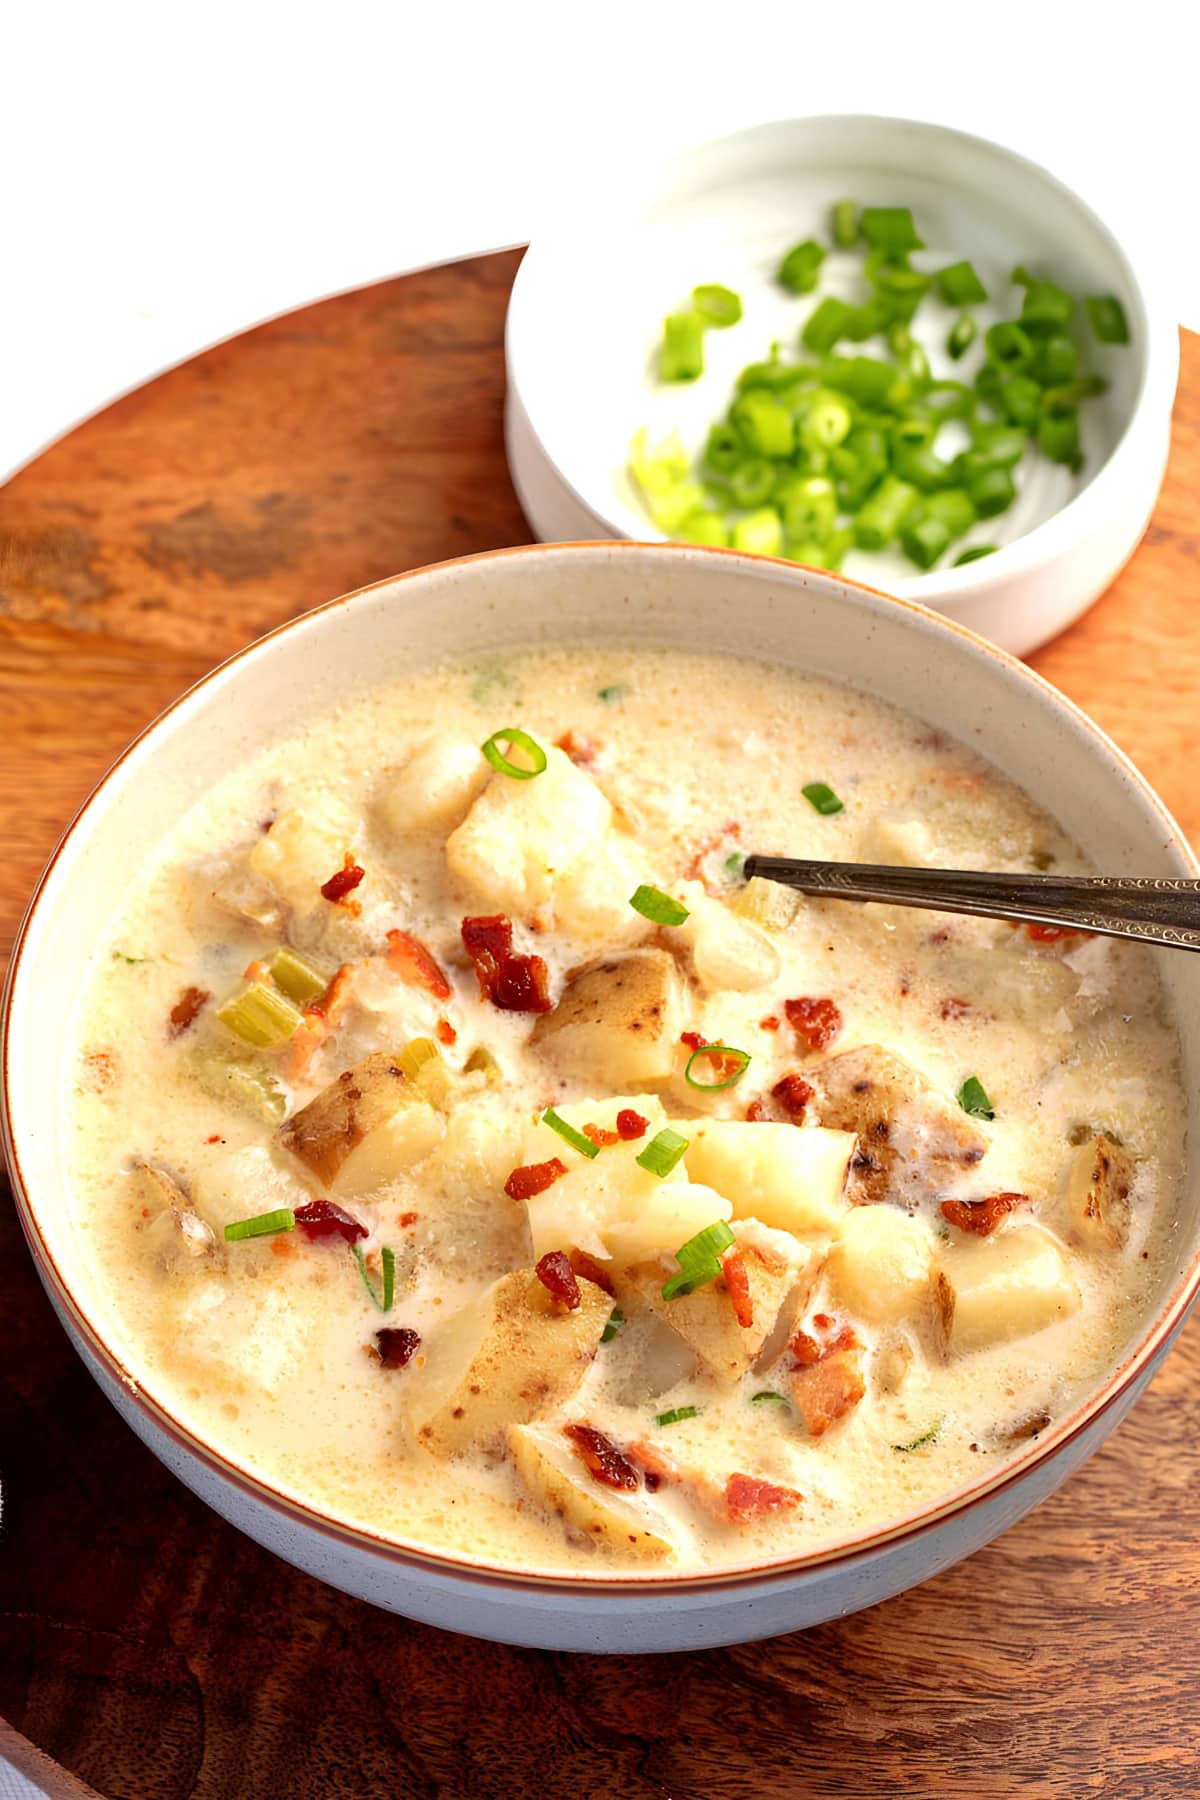 Bowl of Homemade Irish Potato Soup with Bacon and Green Onions